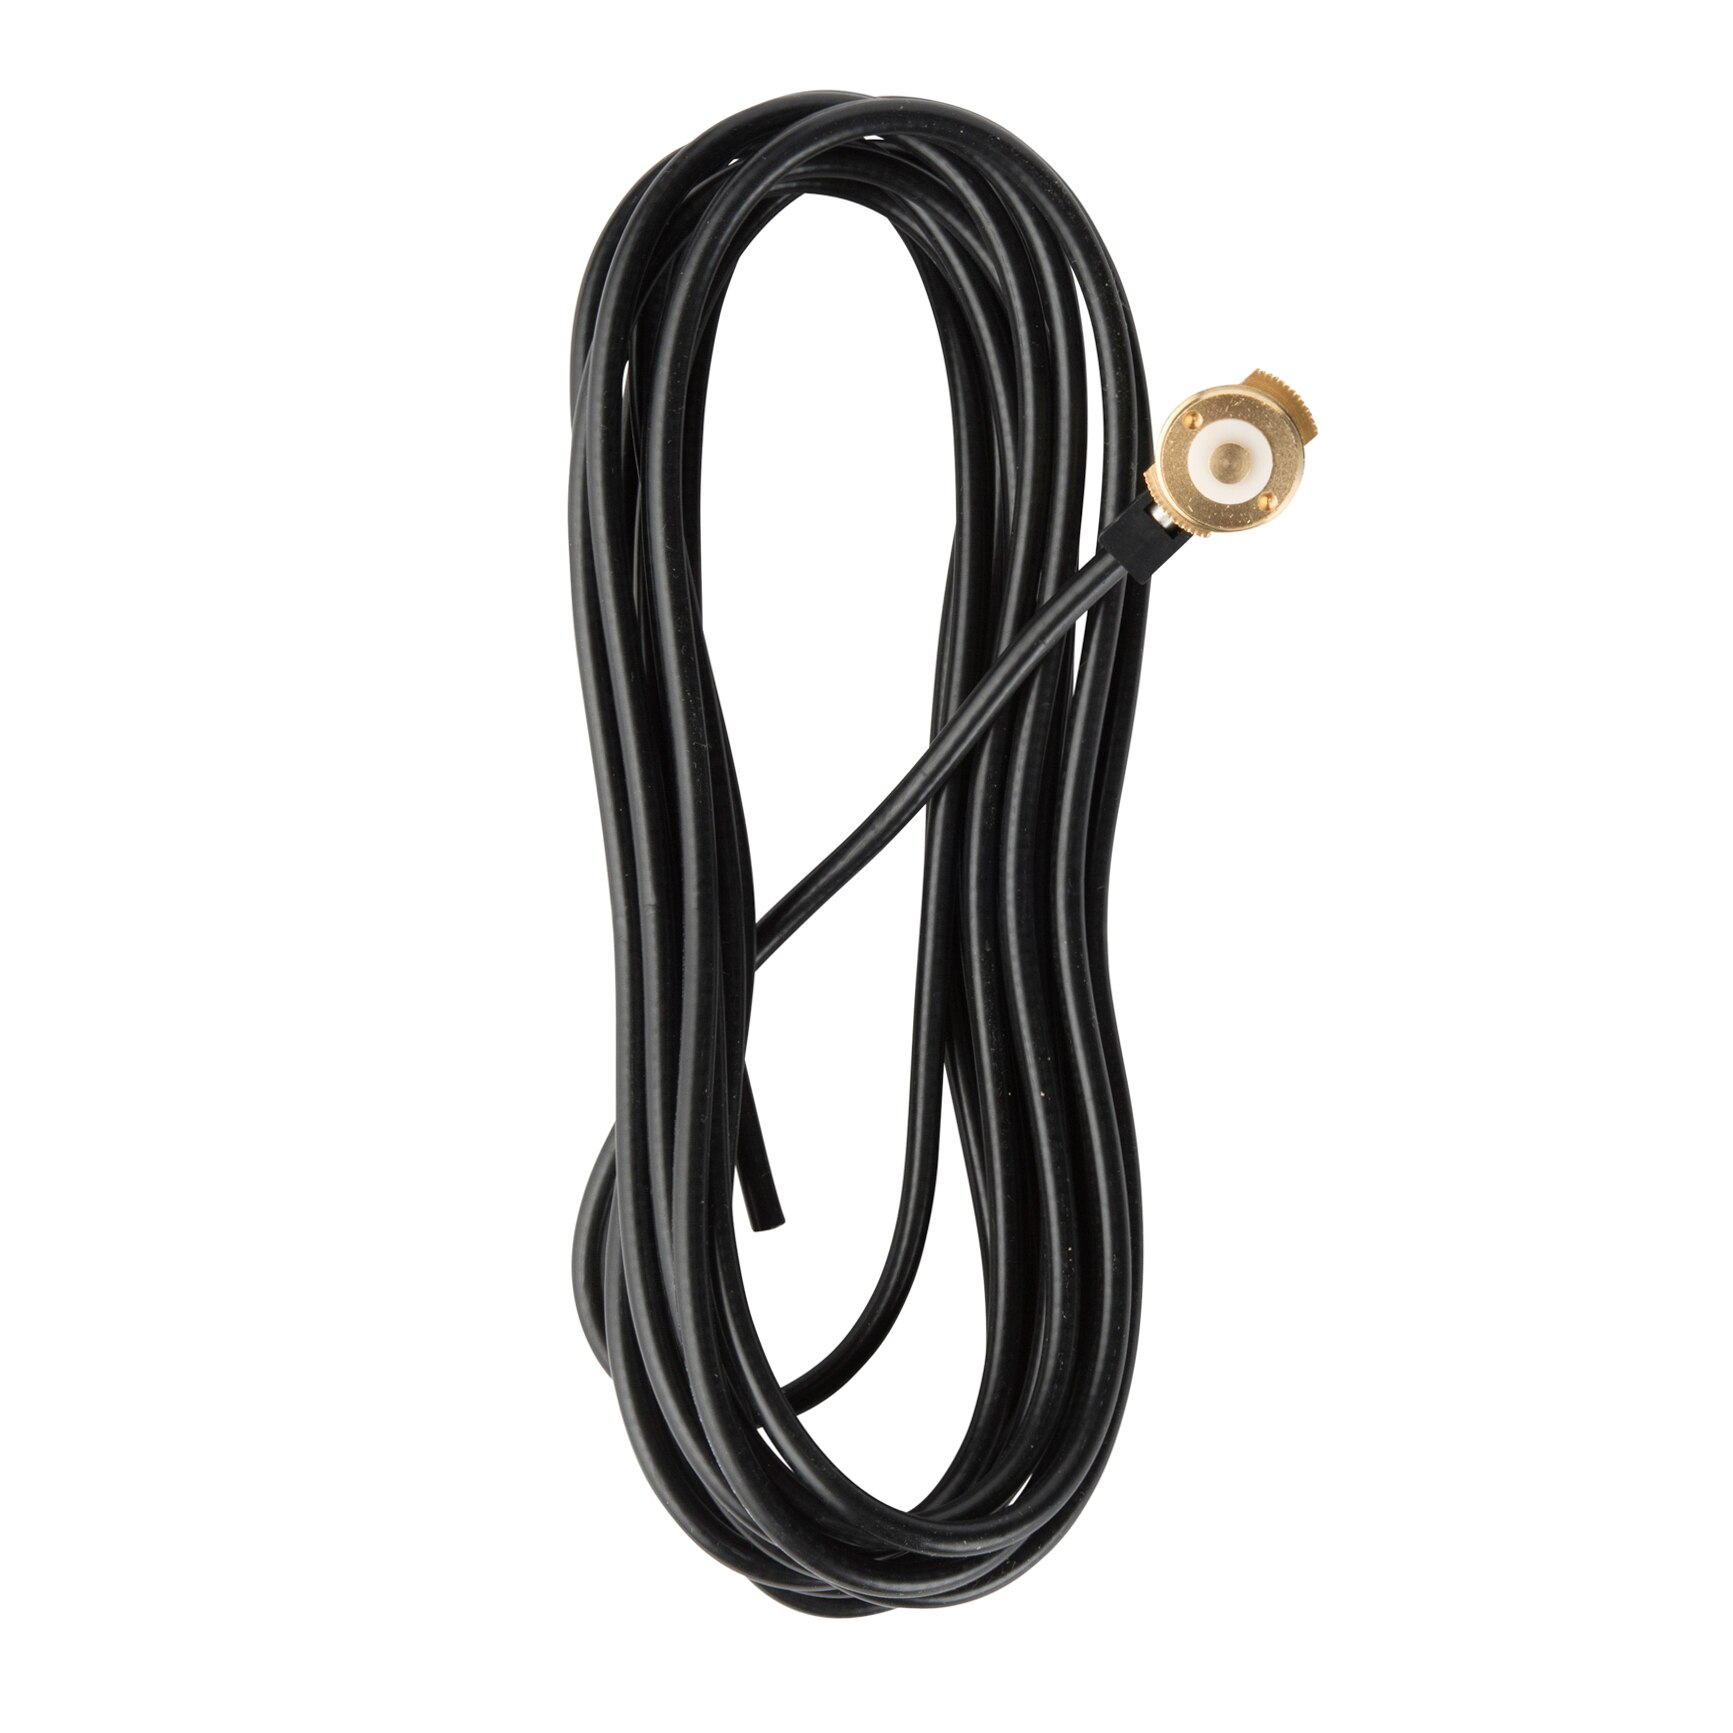 3 dB Stubby Antenna With 17-ft. Cable and Mini UHF Connector